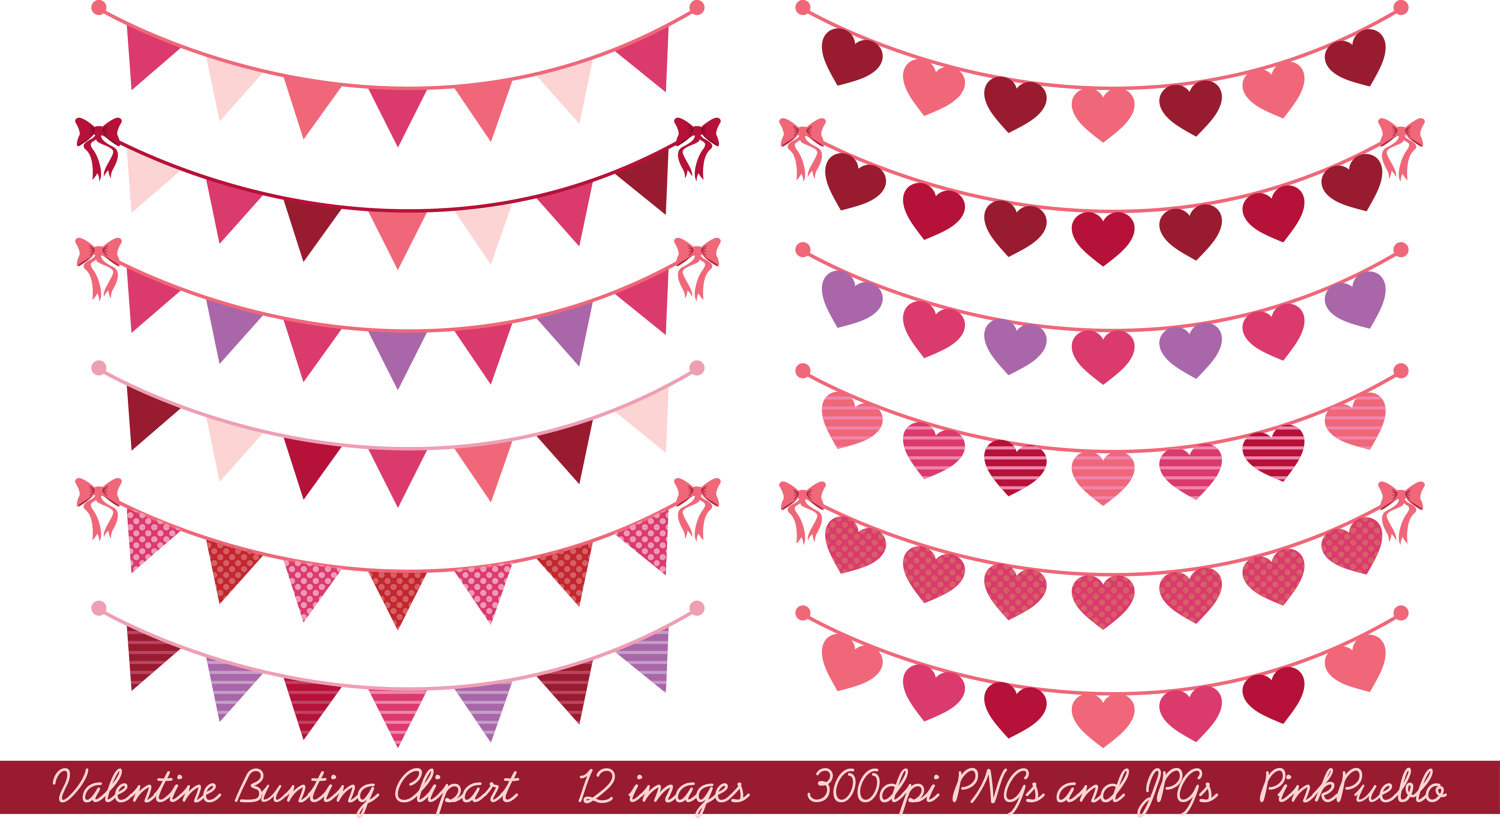 Valentines Day Banner Clip Art Clip Art Library Garland clipart with hearts and lips. clipart library